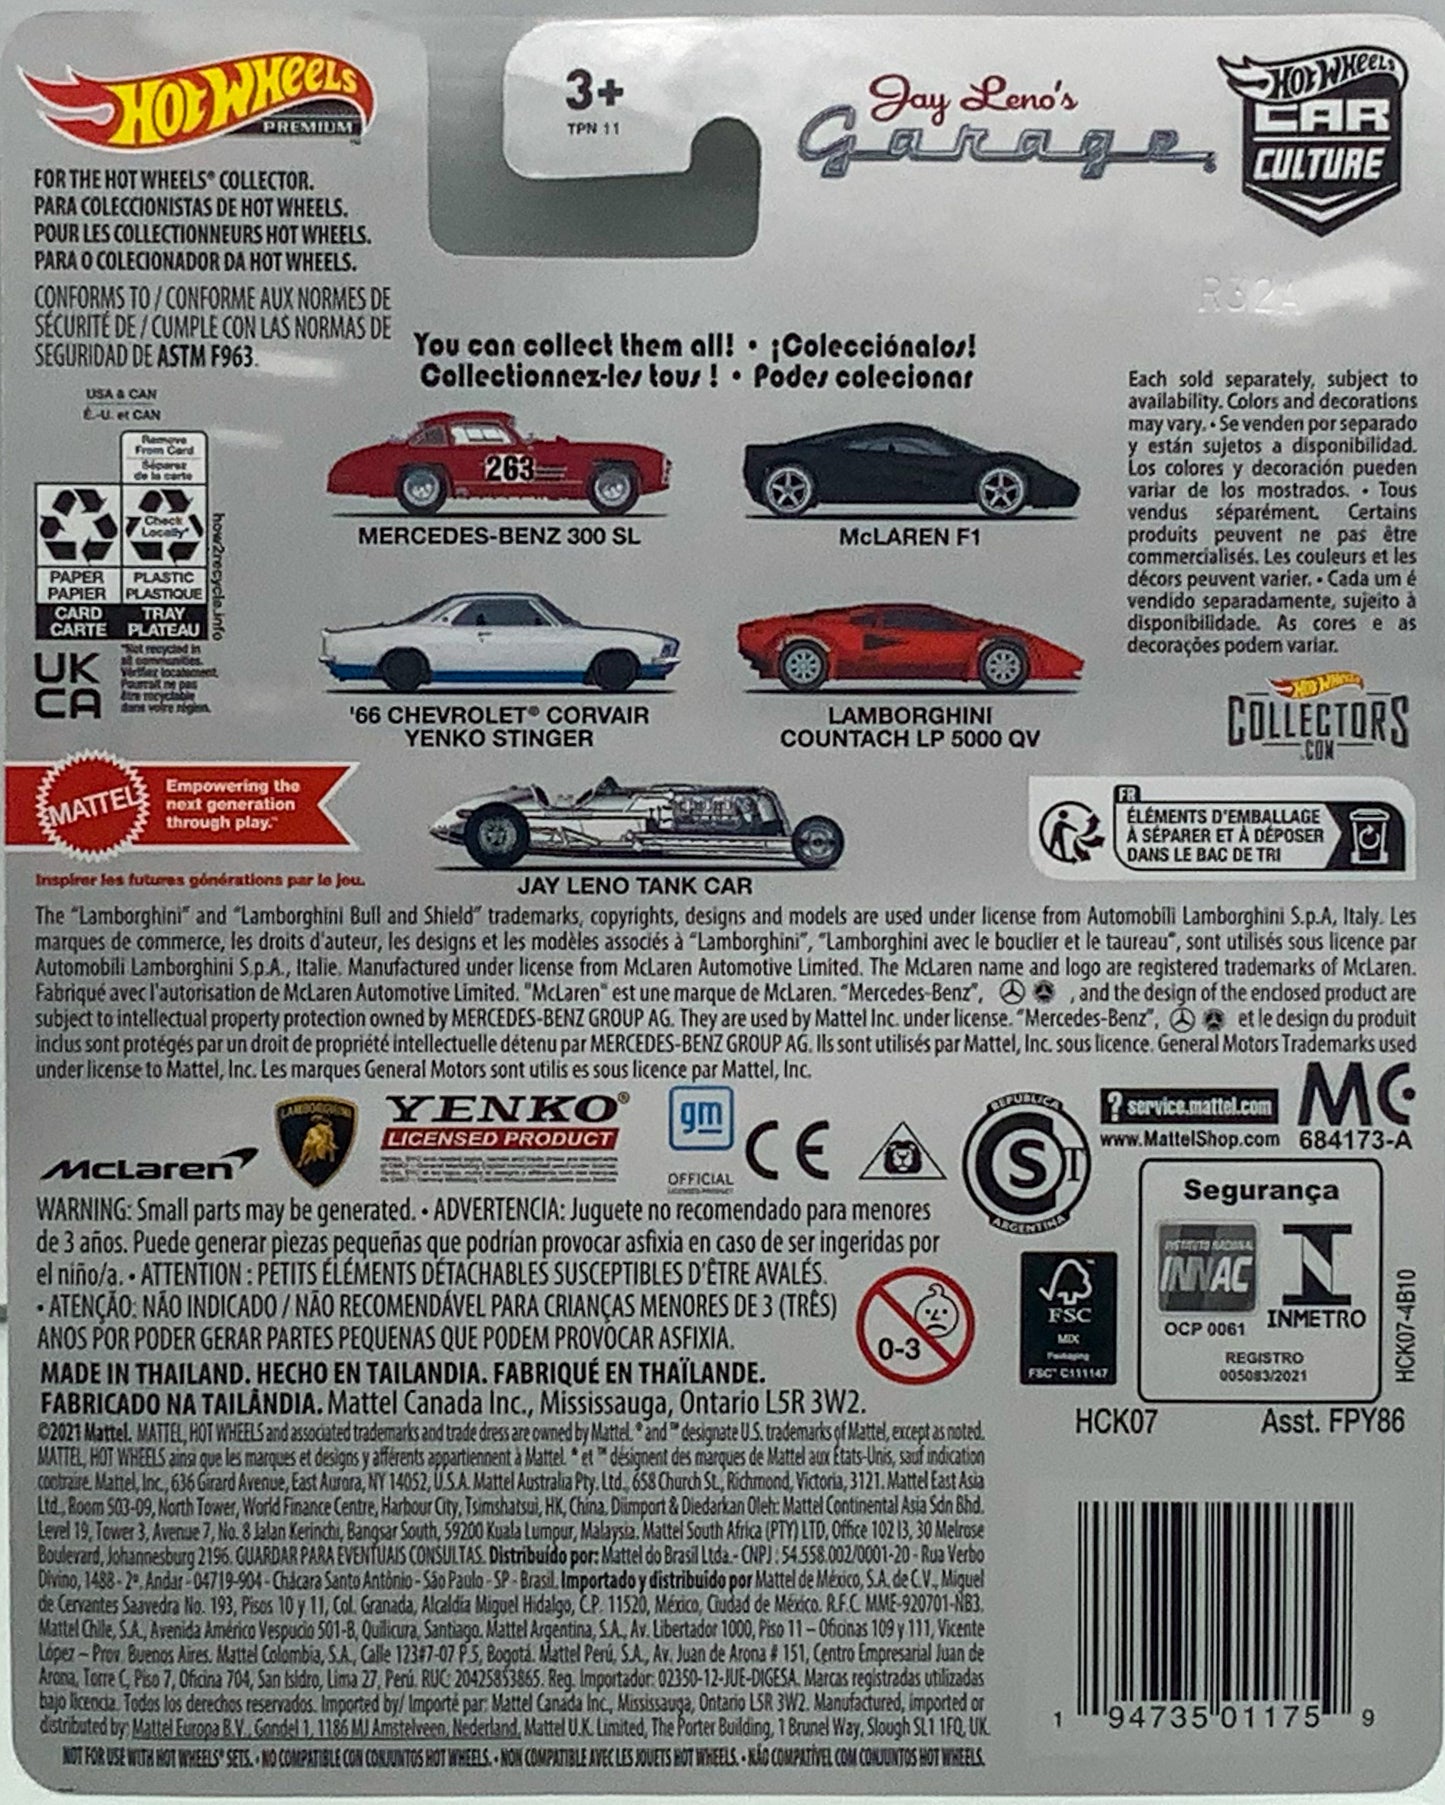 Buy at Tatoyshop.com Products Direct from Shipper Manufacturer Box Made in Thailand Hot Wheels Cars Toys Mattel FPY86 00887961619805   Buy at Tatoyshop.com Back of the Card shows the 5 Cars on the Series  Mercedes-Benz 300 SL 1/5 McLaren F1 2/5 '66 Chevrolet Corvair Yenko Stinger 3/5 Lamborghini Countach LP 5000 QV 4/5 Jay Leno Tank Car 5/5 